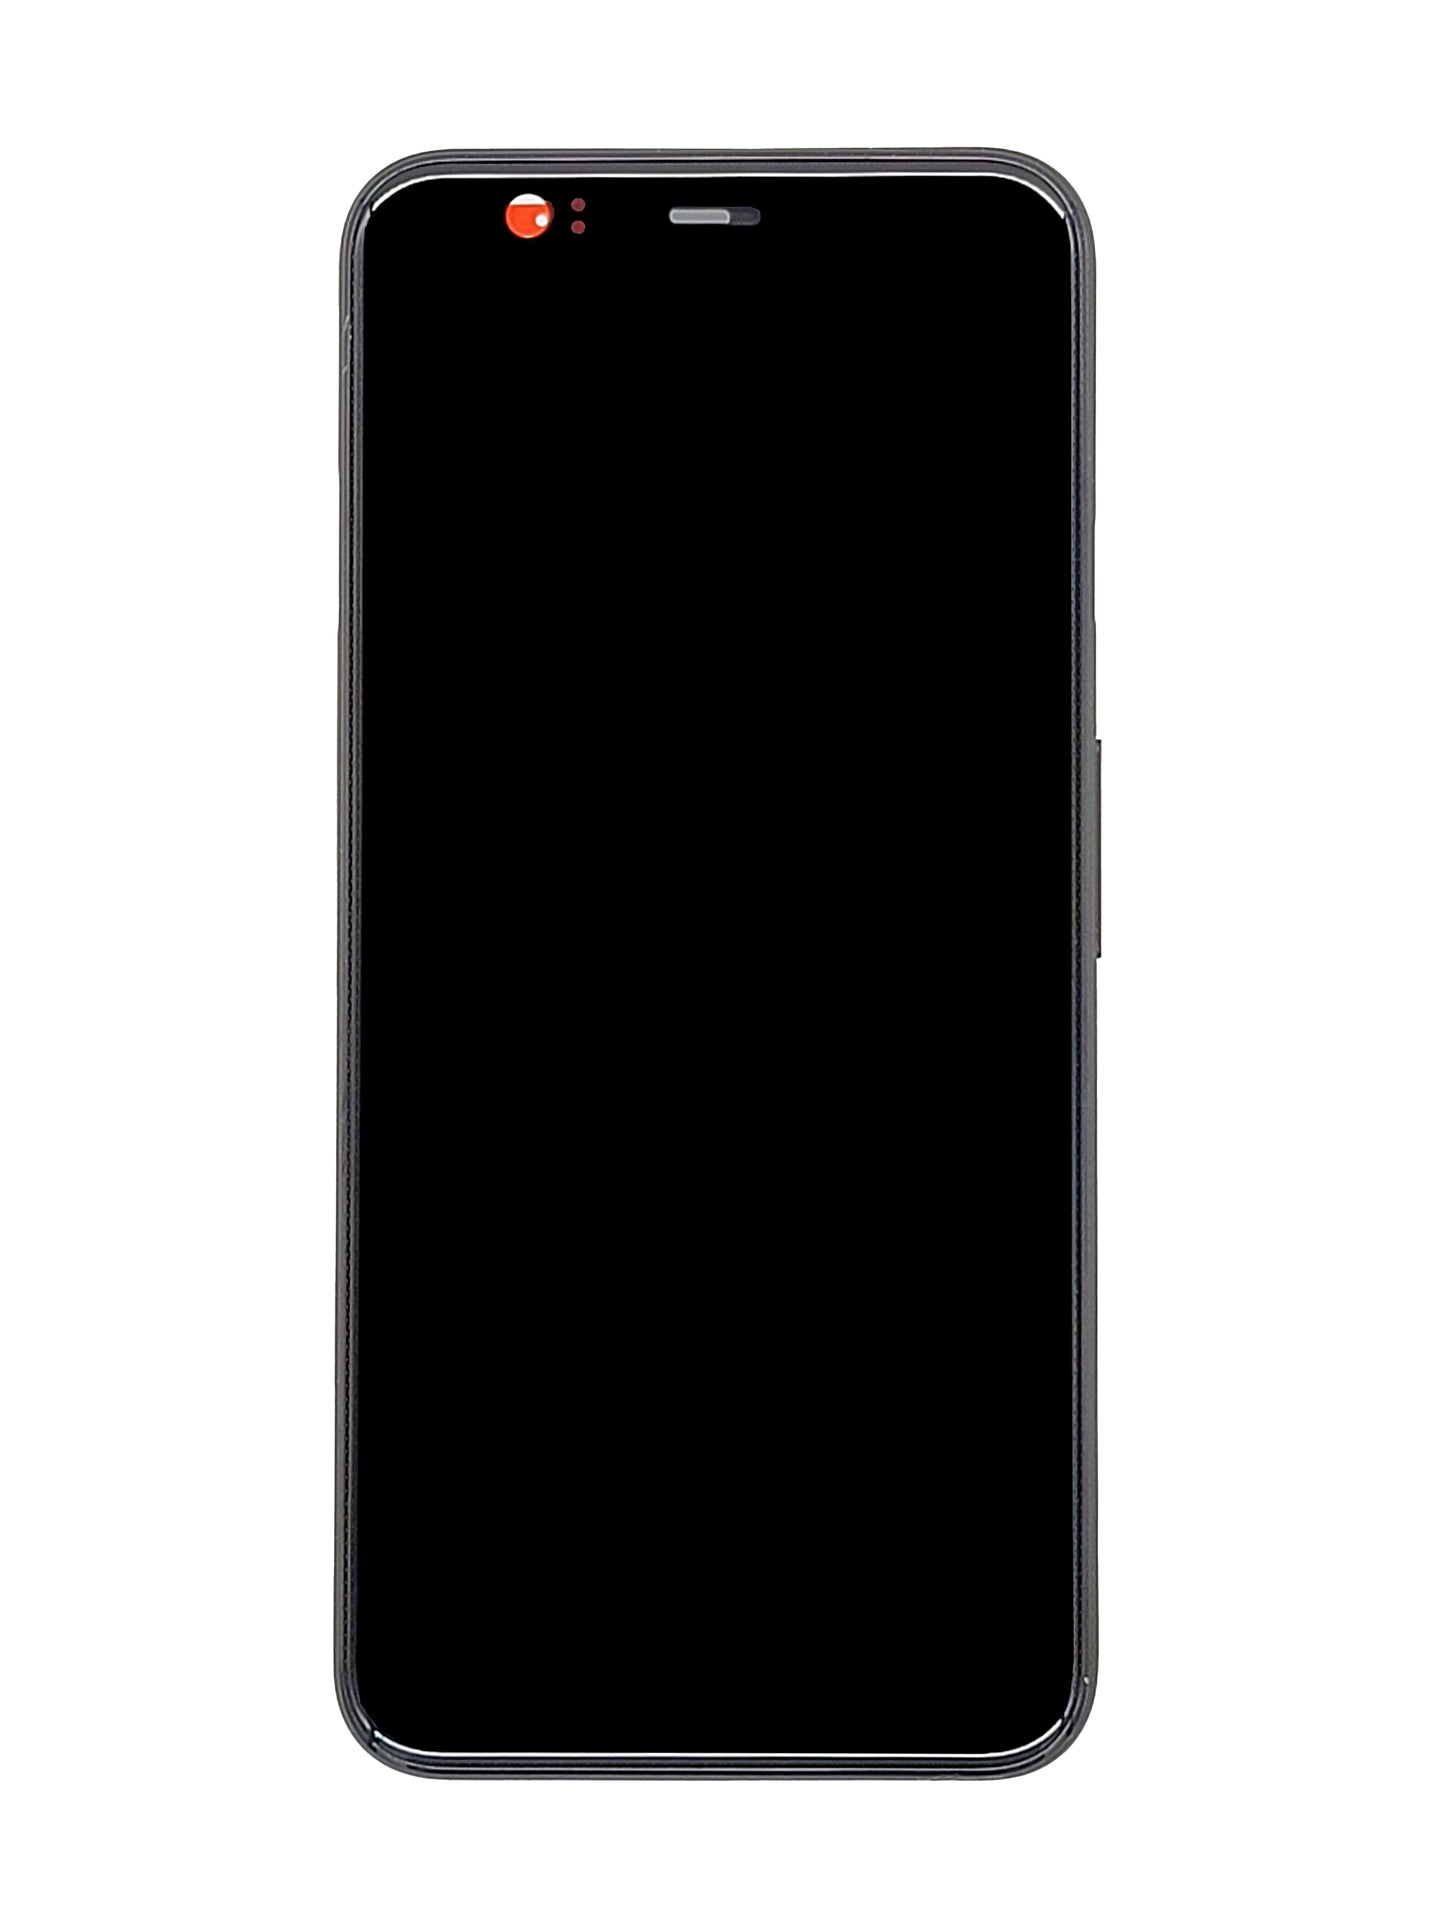 GOP Pixel 4 Screen Assembly (With The Frame) (Refurbished) (Black)